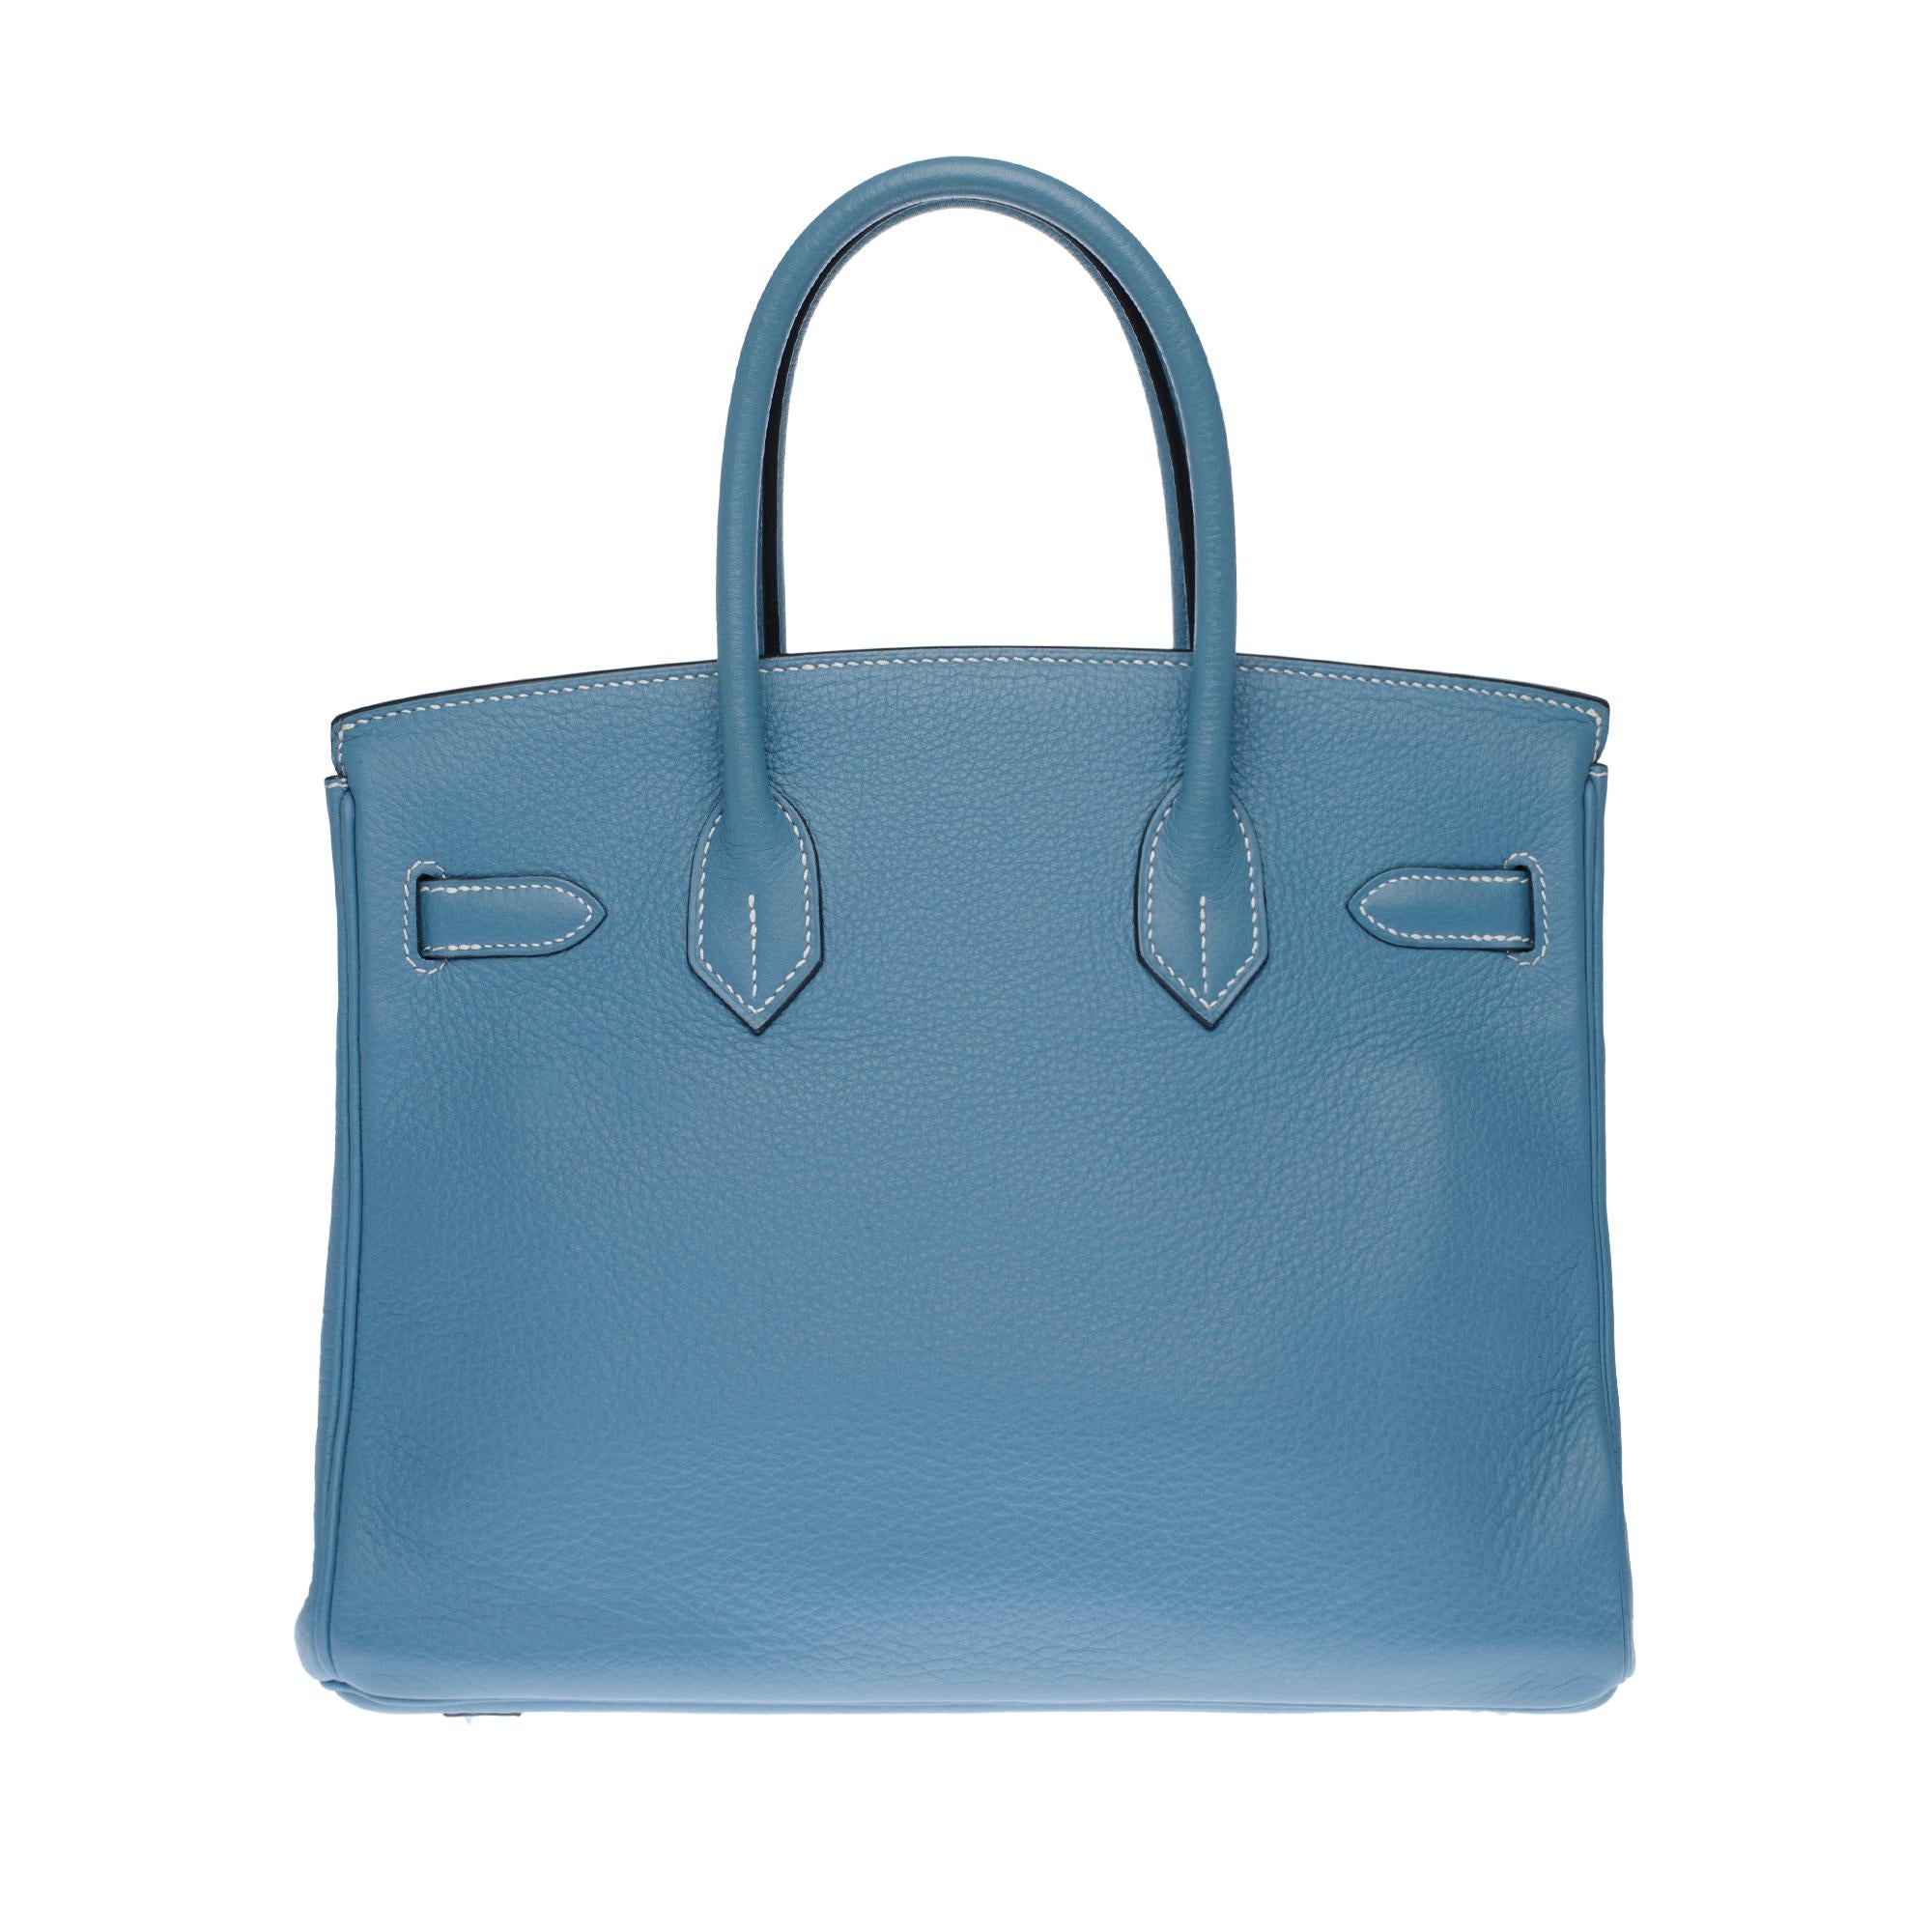 Beautiful Hermes Birkin 30 cm handbag in Togo blue jean leather , Palladium silver metal hardware, double handle in blue leather allowing a handheld.

Closure by flap.
Lining in blue leather, a zipped pocket, a patch pocket.
Signature: 